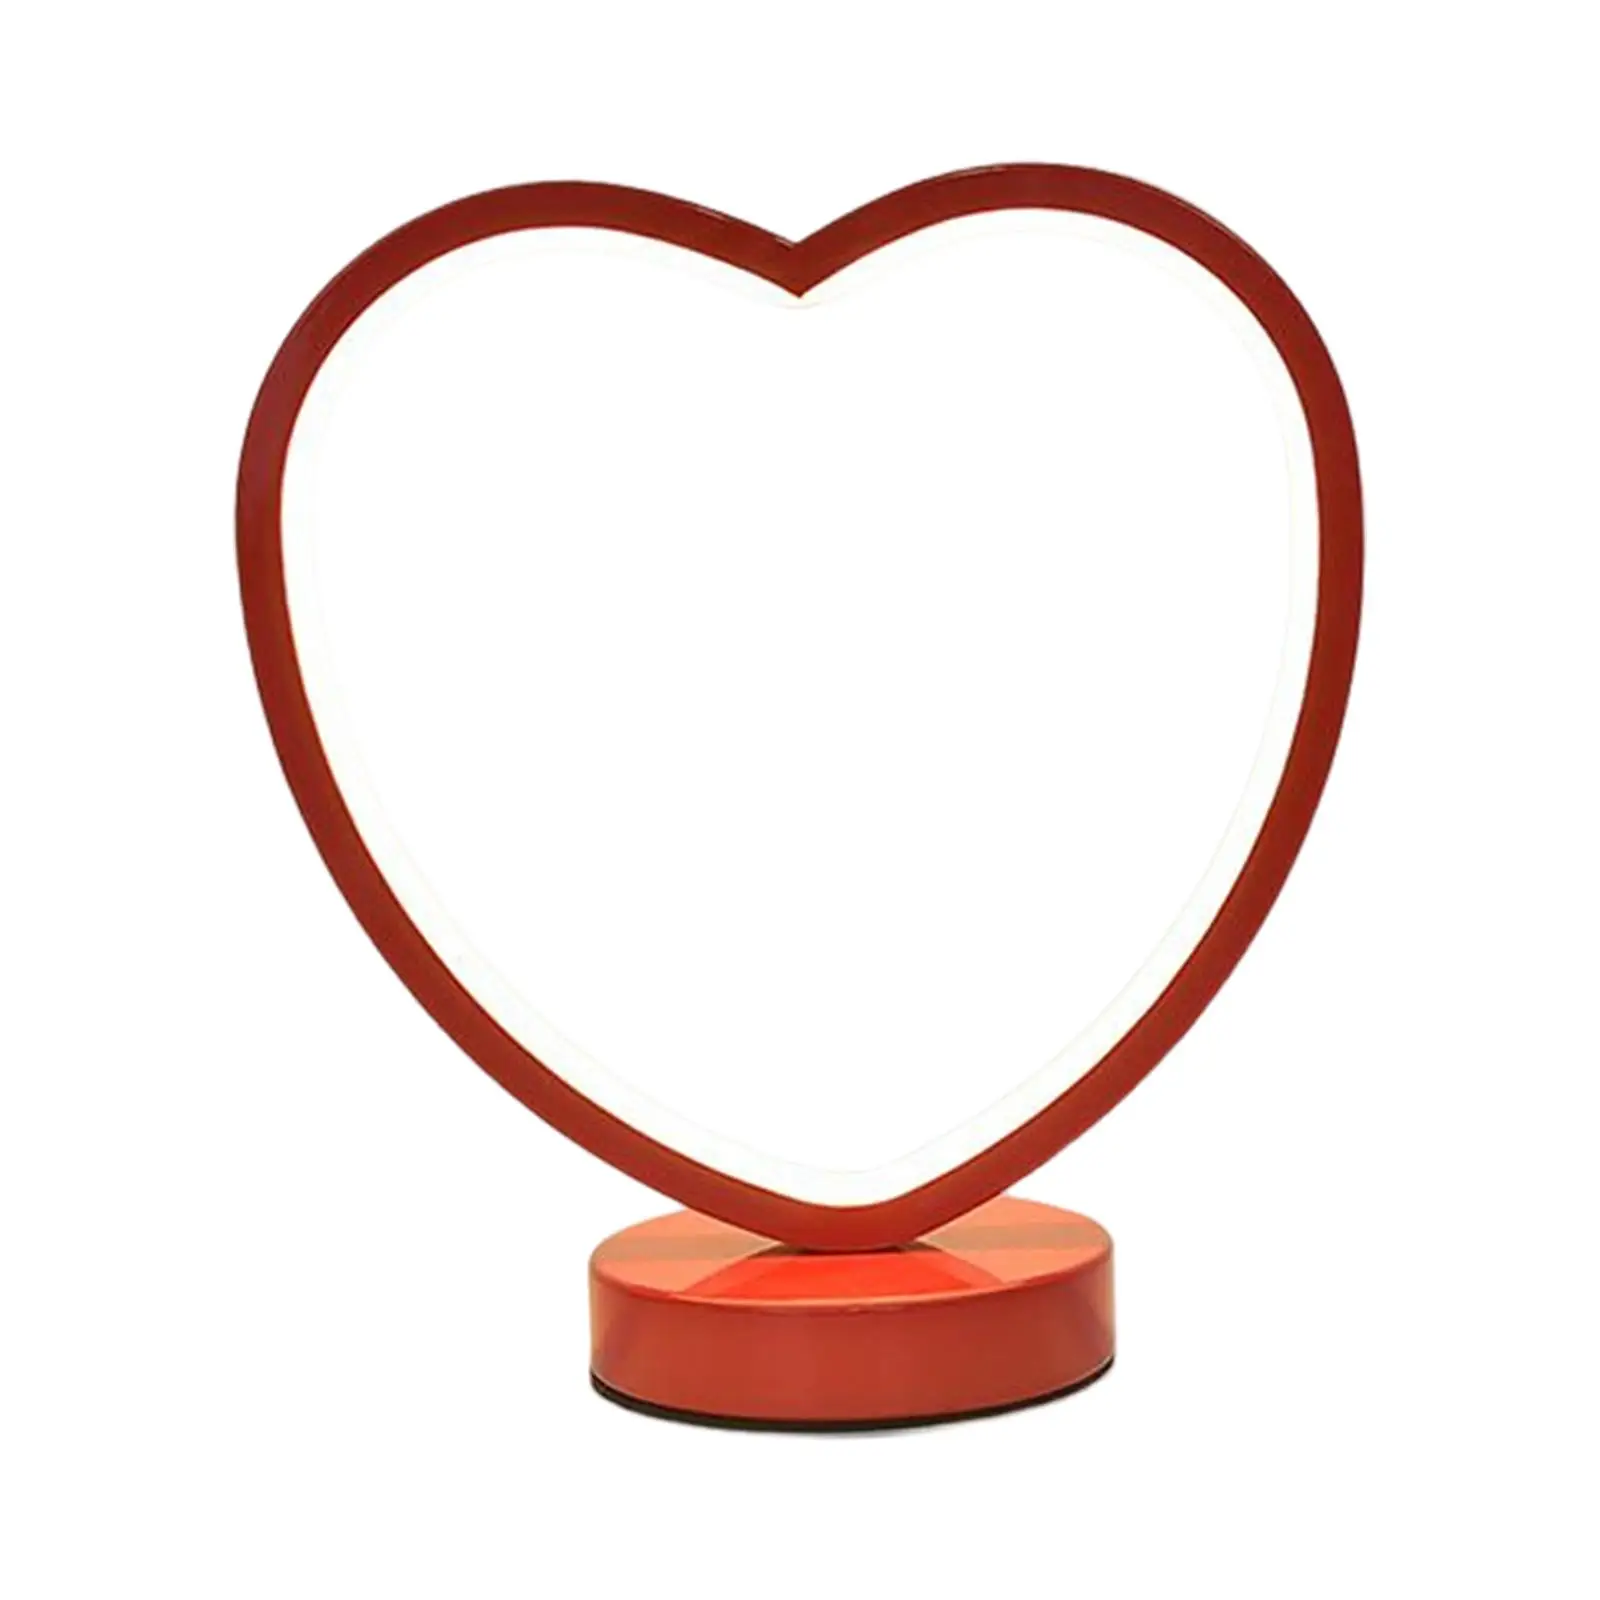 Heart Shaped Desk Light Decoration Red Frame Warm White Metal Table Lamp for NightStand Dining Room Bedroom Party New Year